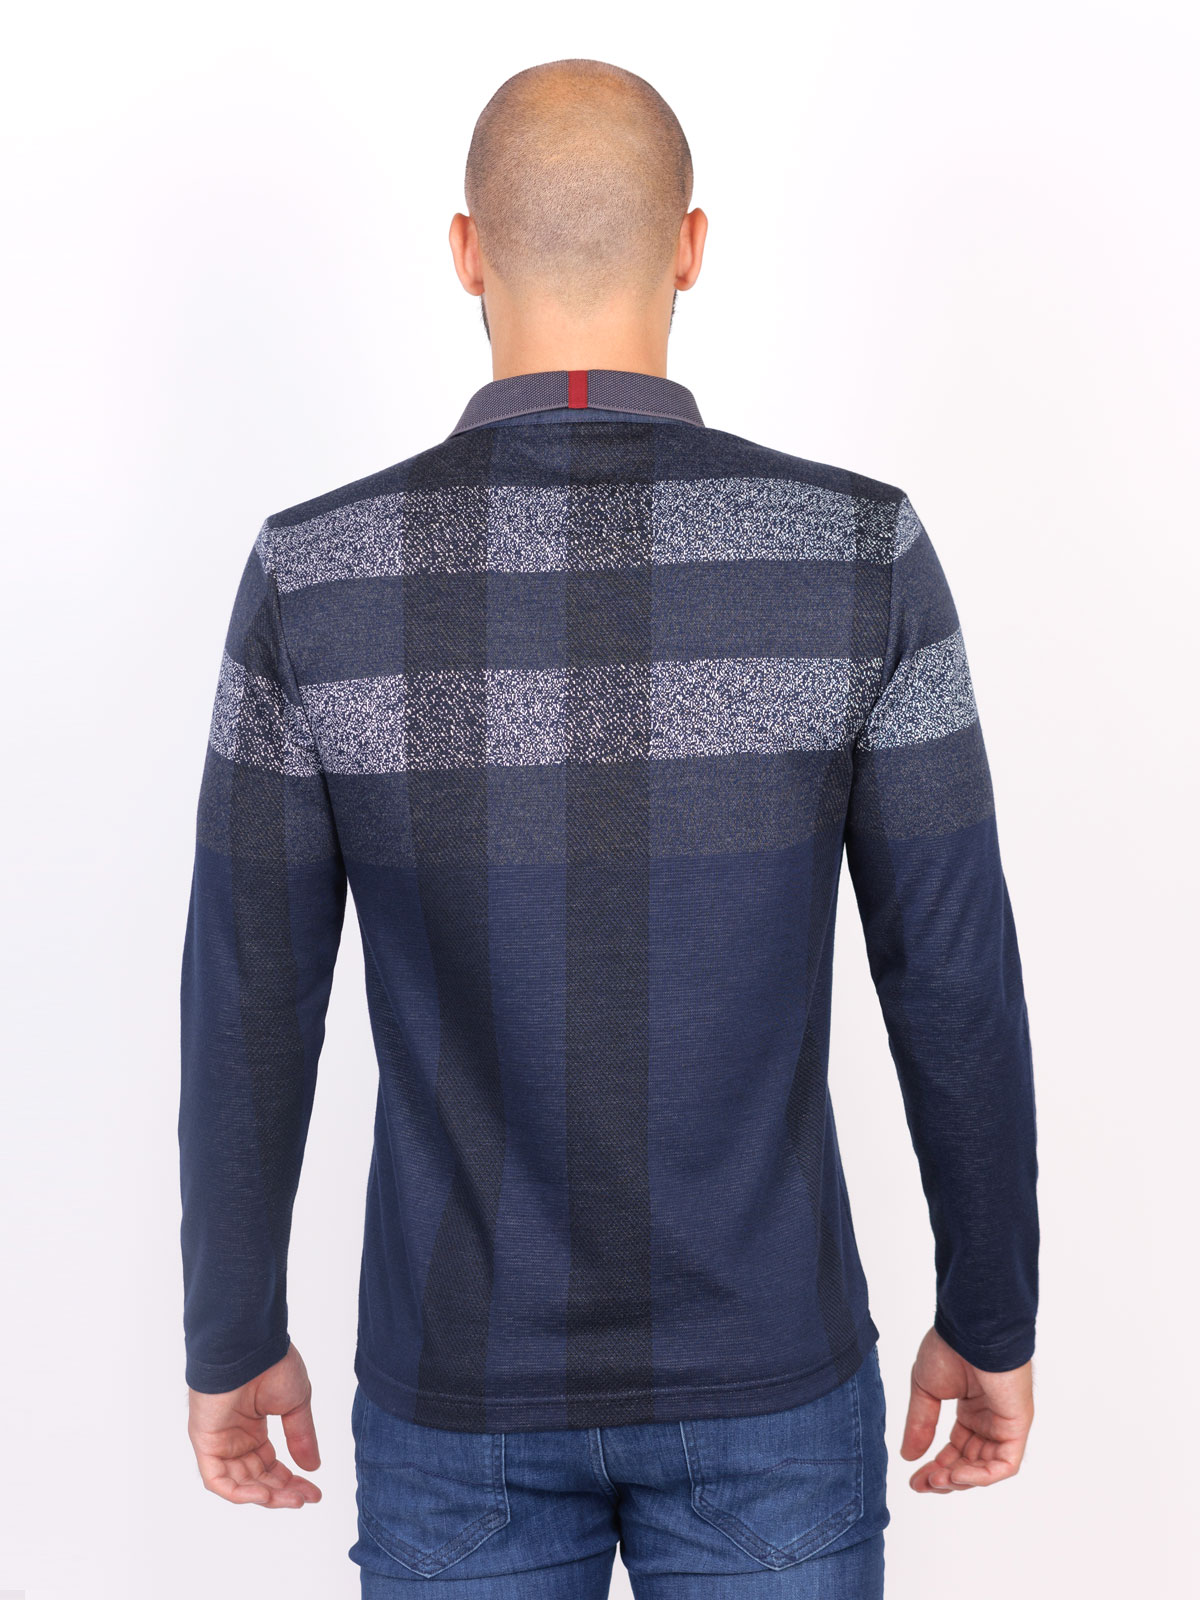 Mens blouse in white and dark blue - 18265 € 37.68 img2